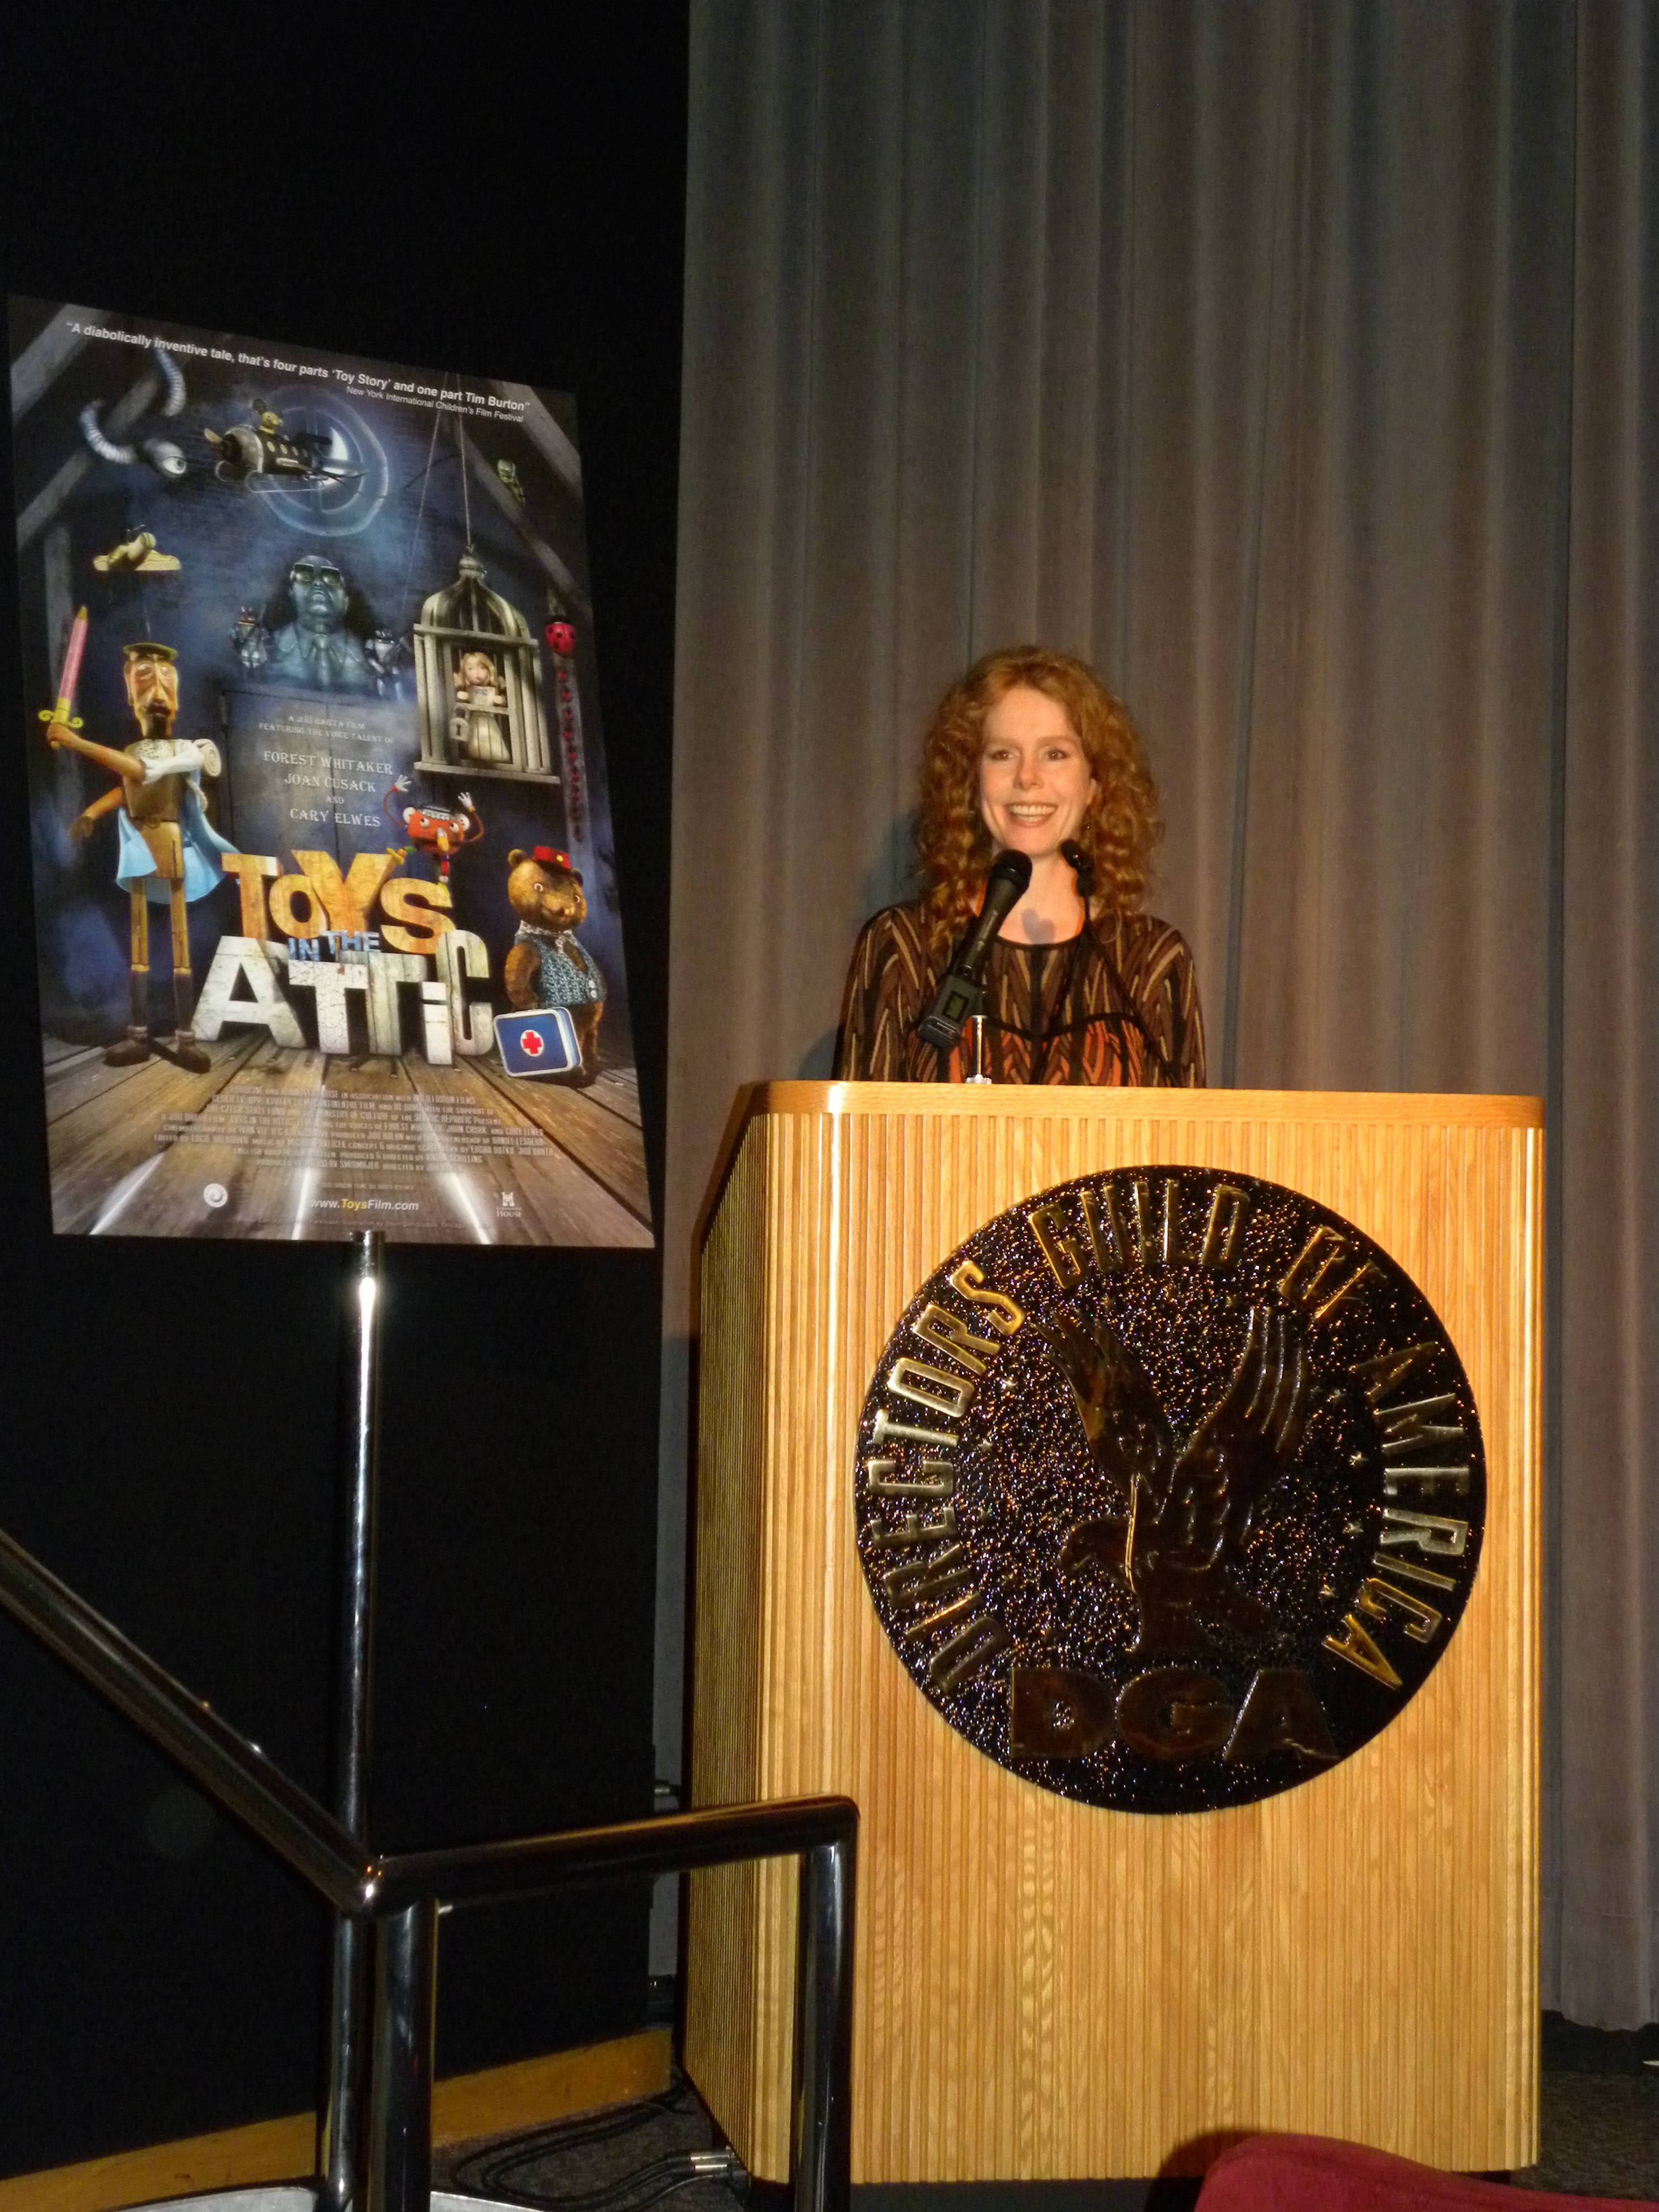 Vivian Schilling at the Director's Guild of America for the Toys in the Attic premiere, September 4, 2012